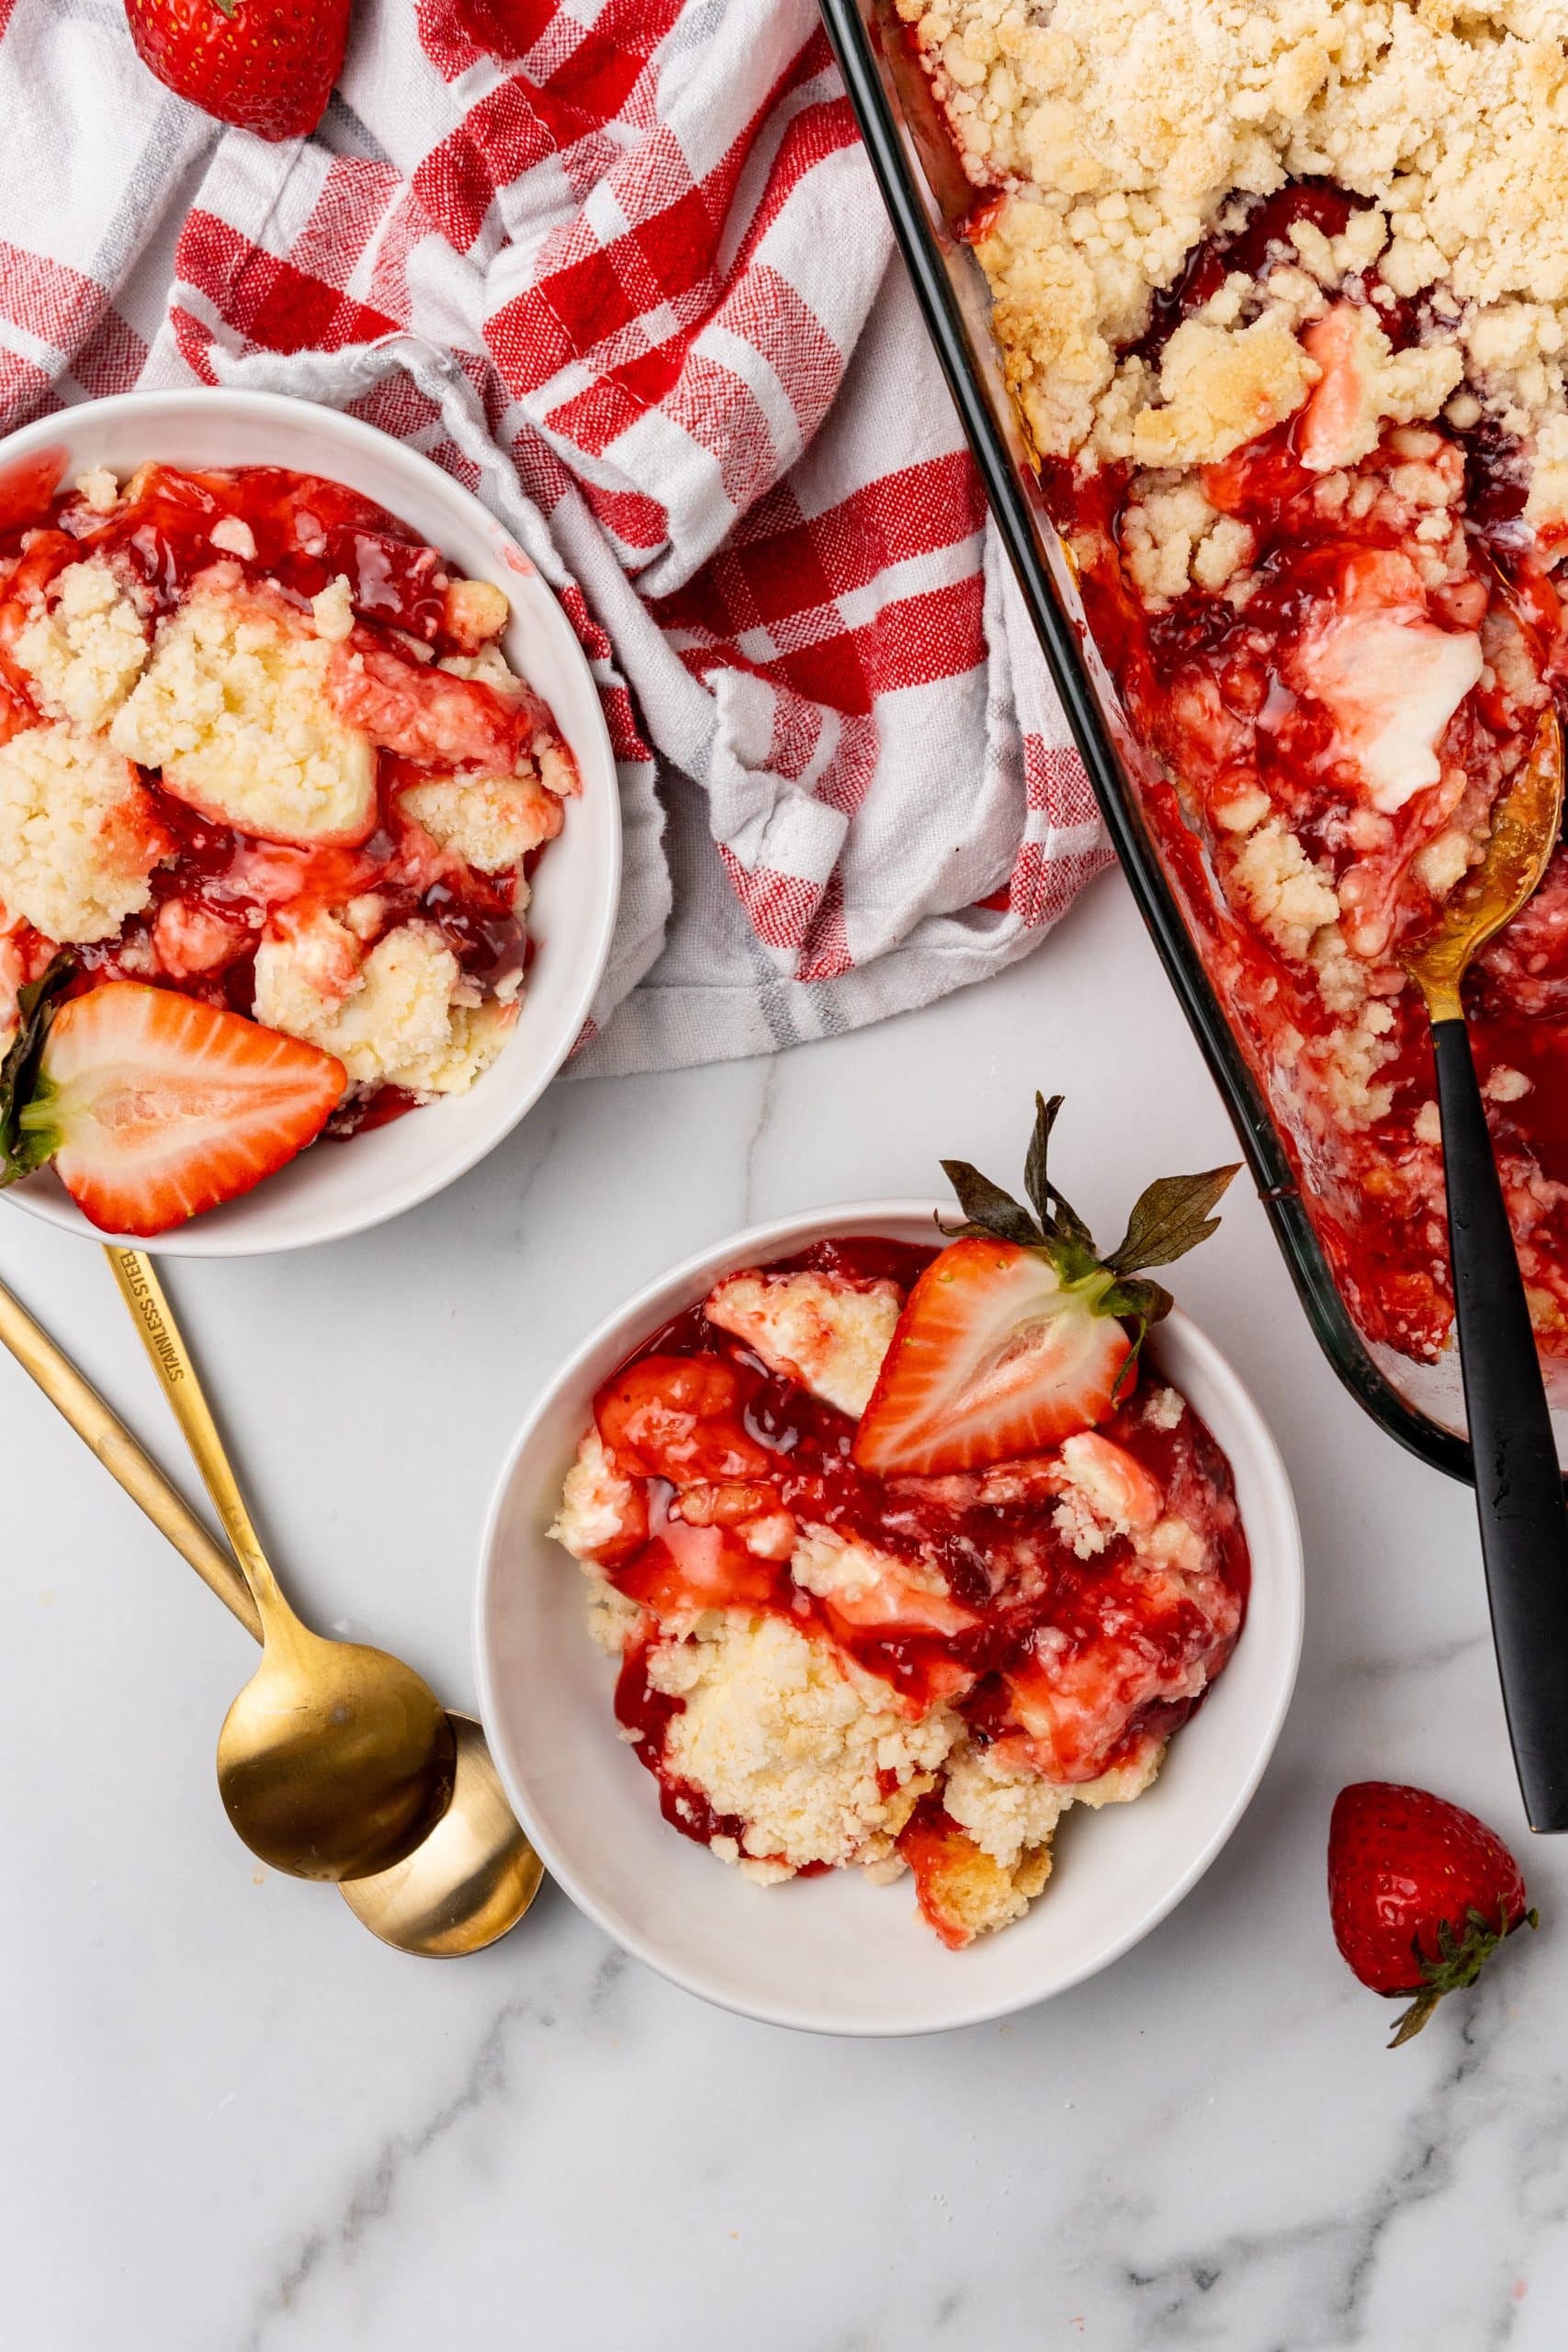 strawberry cheesecake dump cake served in a white bowl